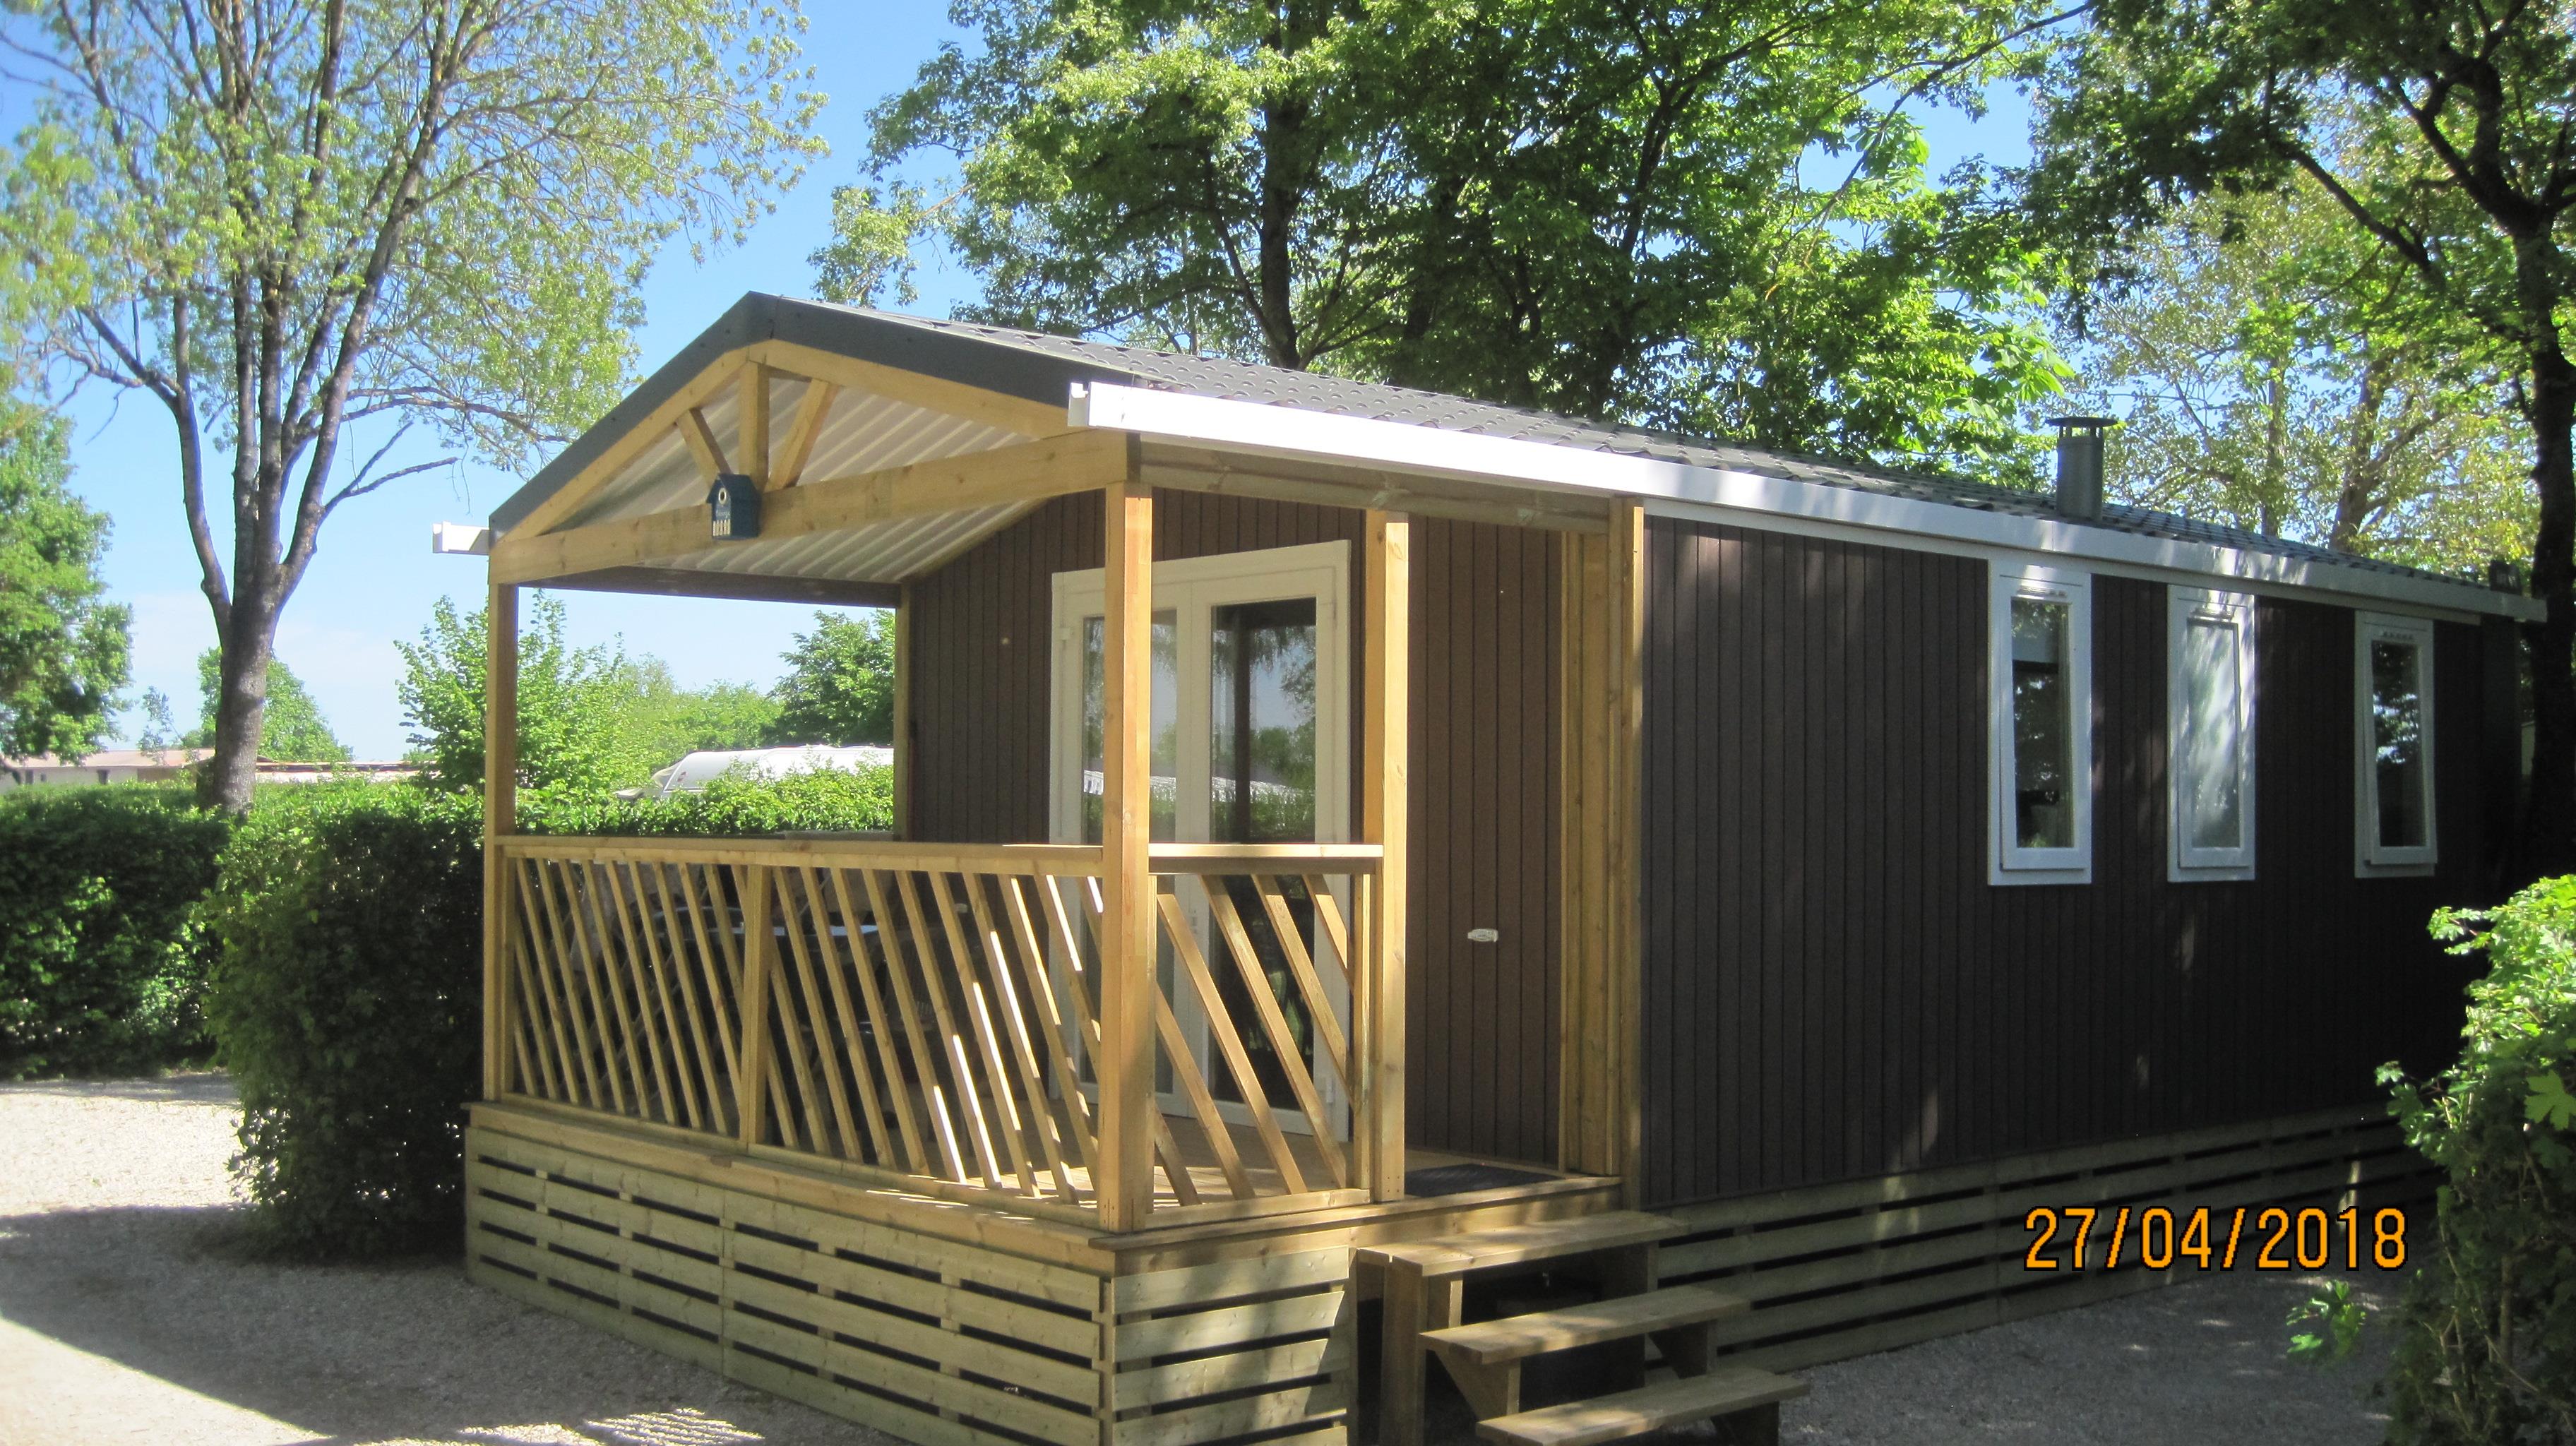 Accommodation - Loggia Bay - Camping Le Paradis des Dombes